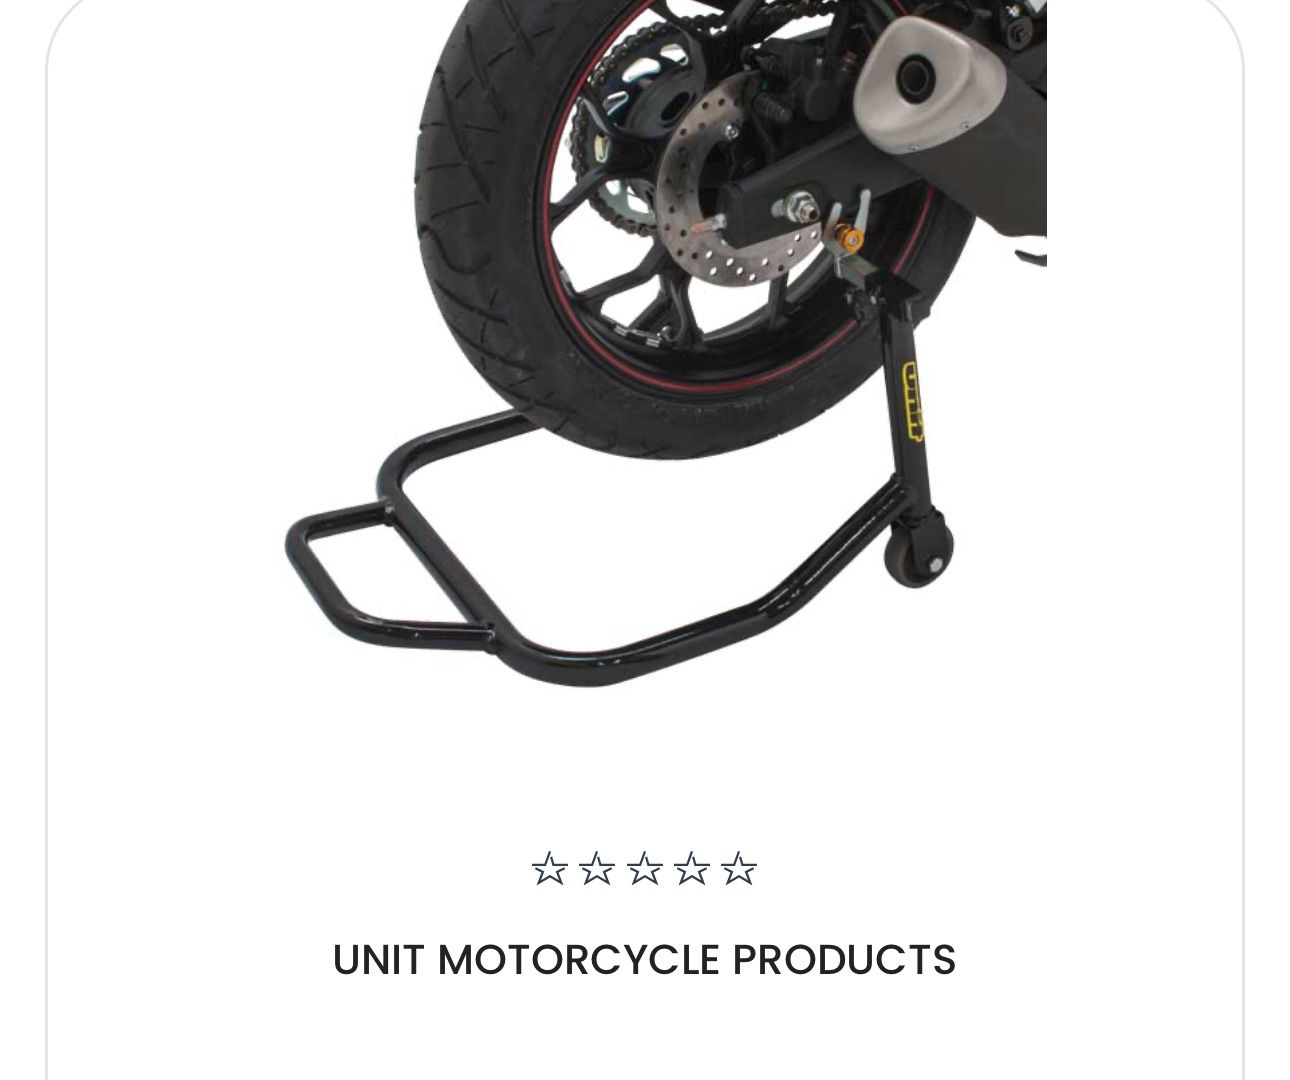 Motorcycle Stand 